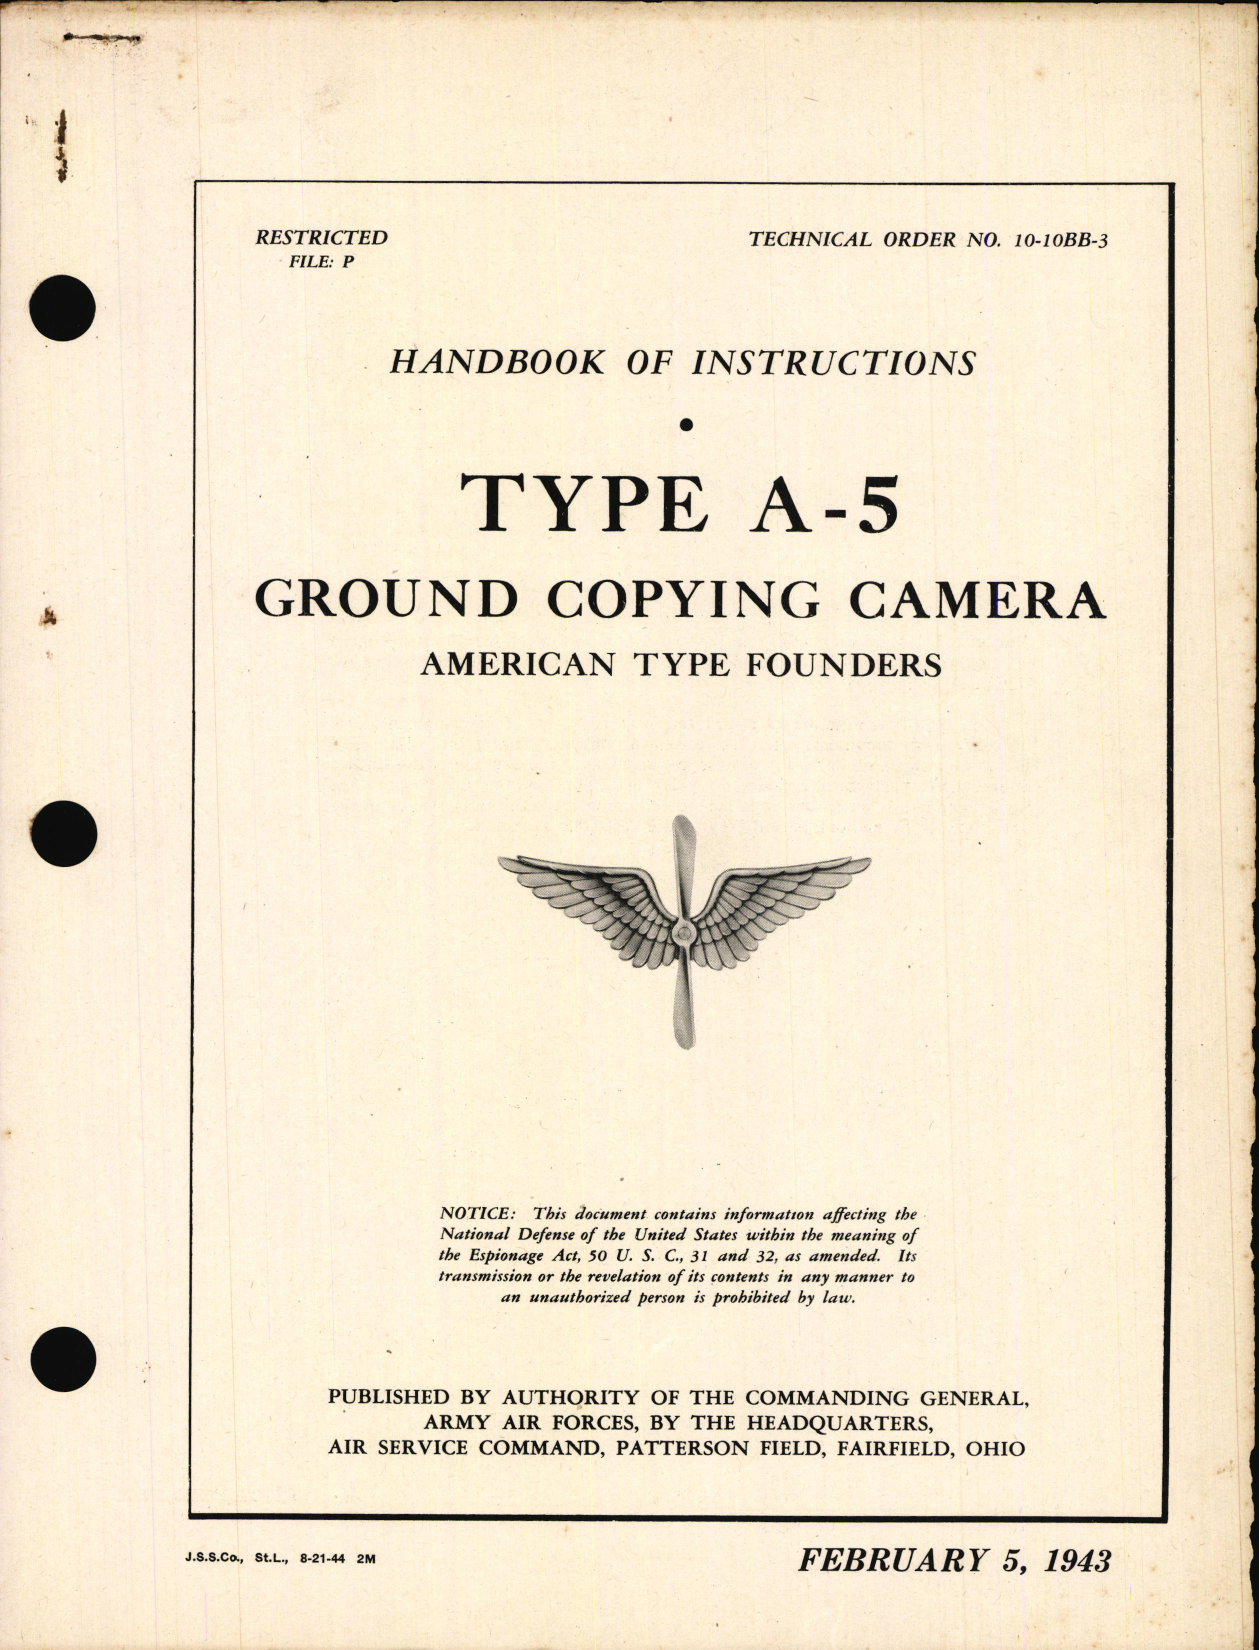 Sample page 1 from AirCorps Library document: Handbook of Instructions for Type A-5 Ground Copying Camera